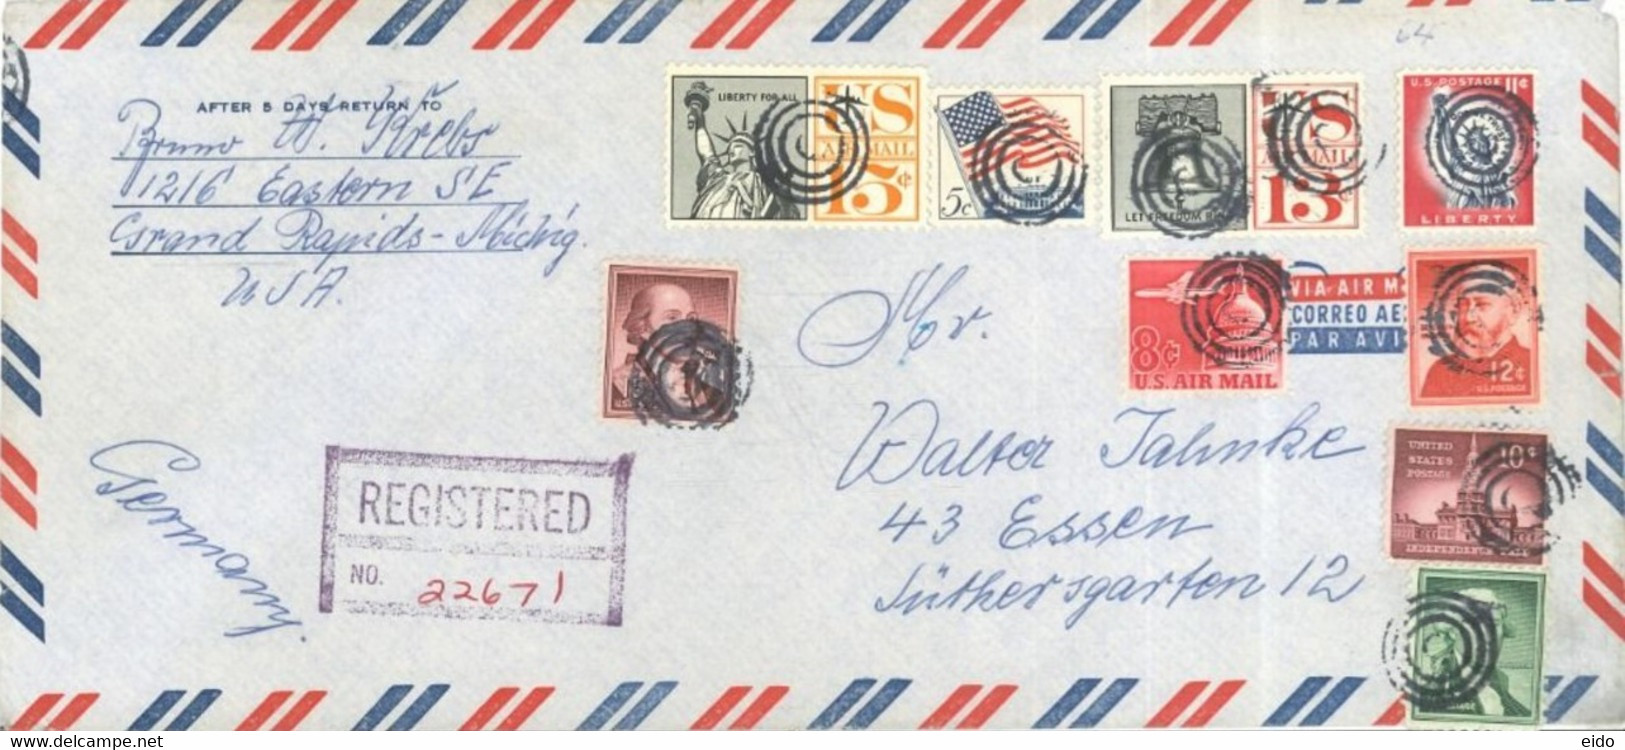 UNITED STATES - 1964- REGISTERED STAMPS COVER TO GERMANY. - 1961-80